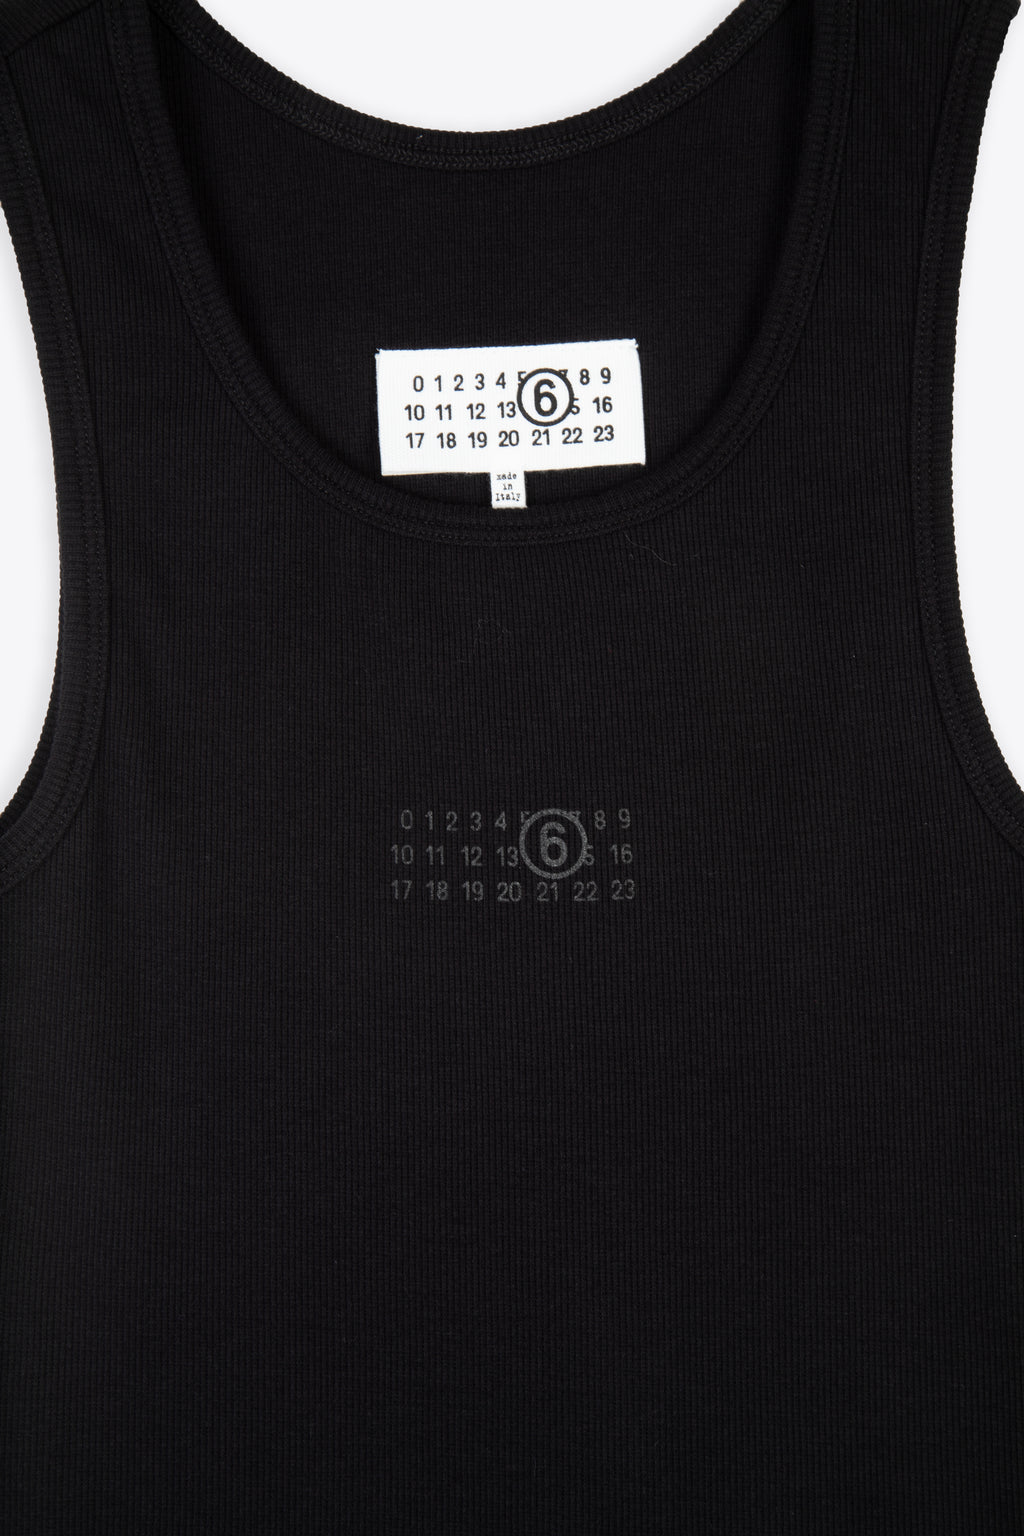 alt-image__Black-ribbed-cotton-tank-top-with-logo